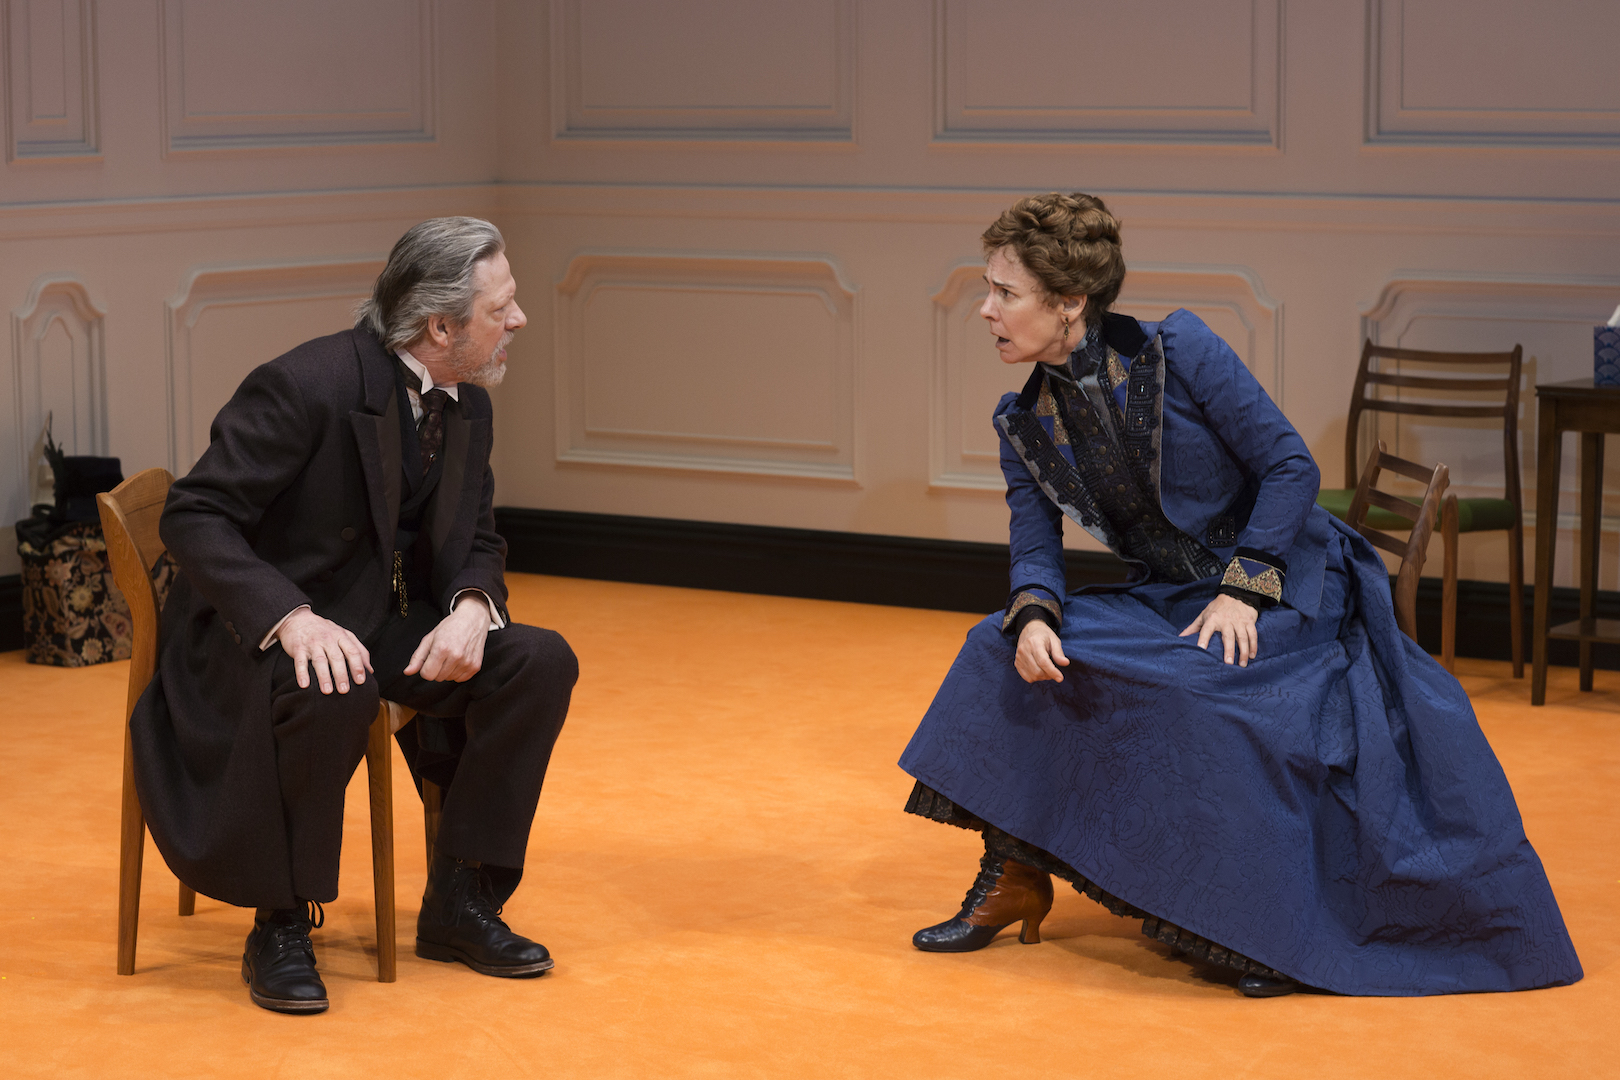 Chris Cooper and Laurie Metcalf in “A Doll’s House, Part 2” (photo: Brigitte Lacombe)